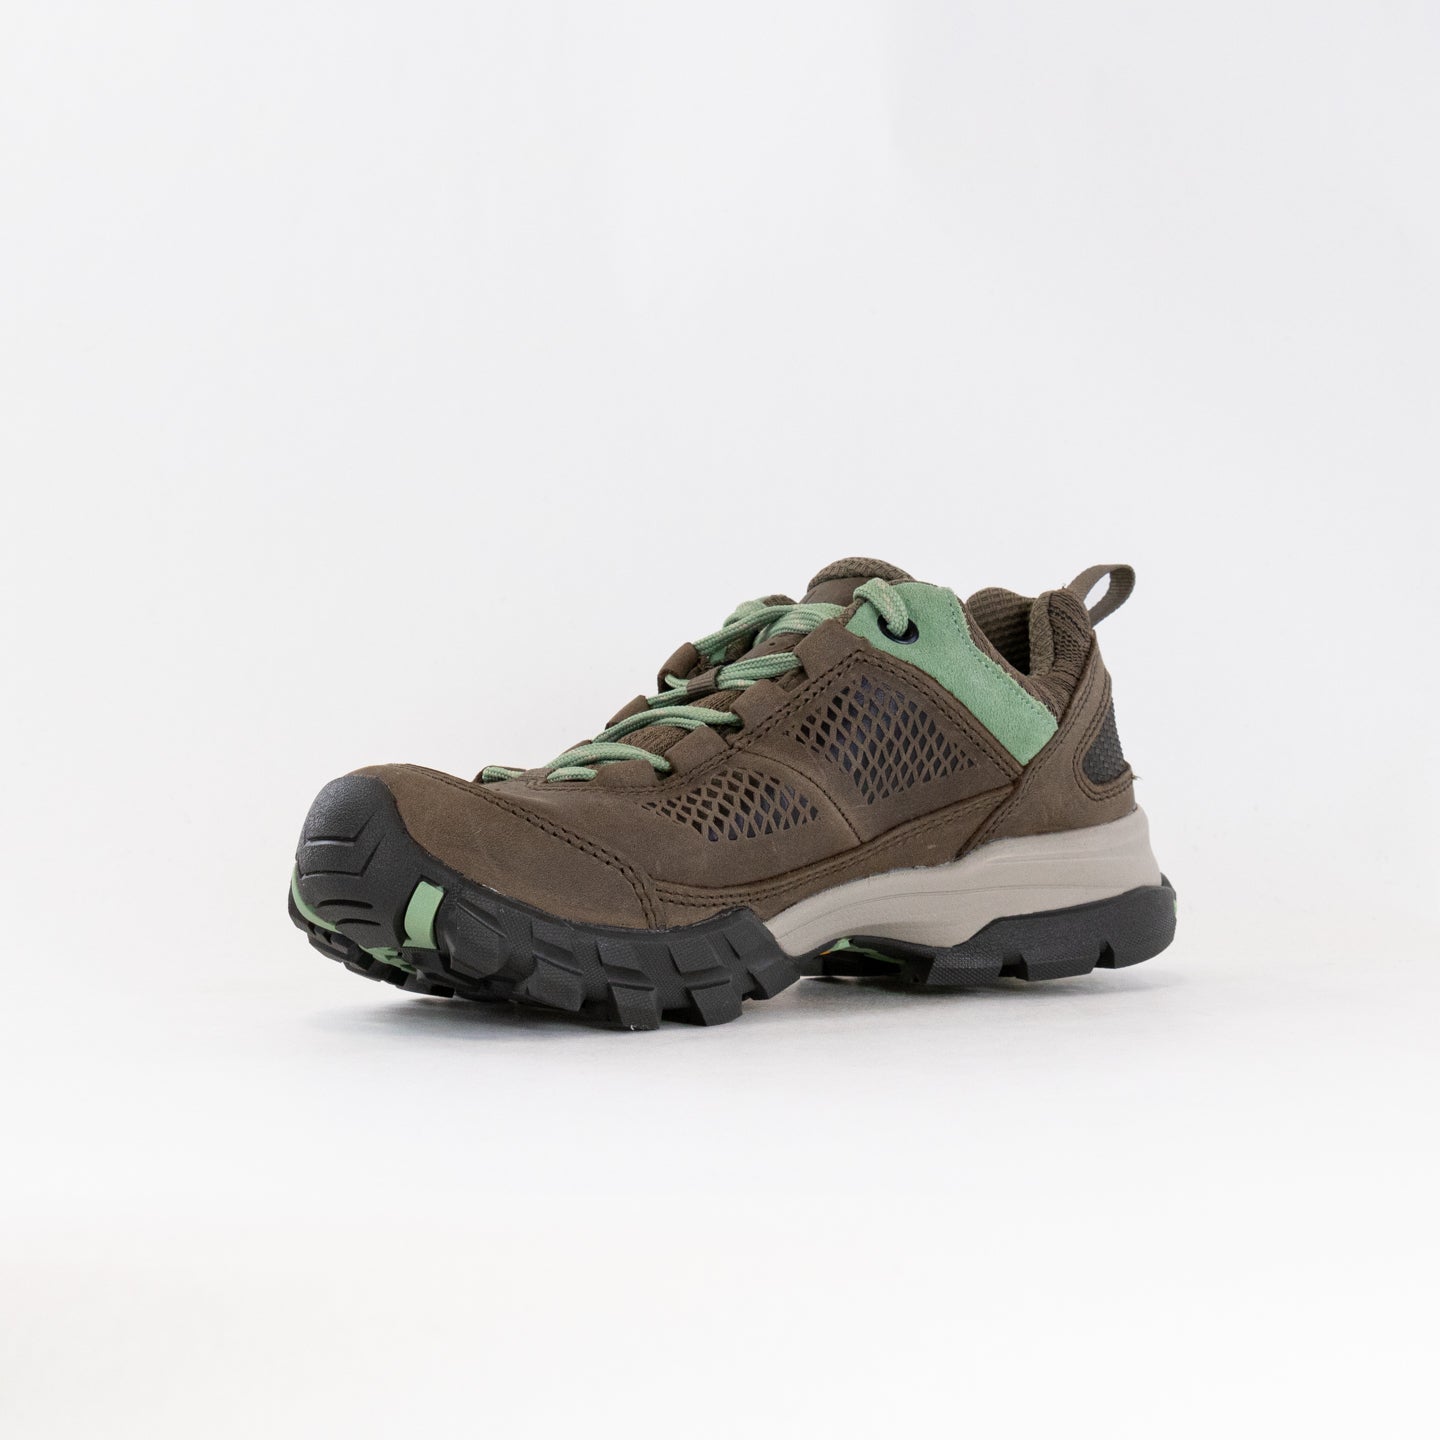 Vasque Talus AT Low UltraDry (Women's) - Bungee Cord/Basil